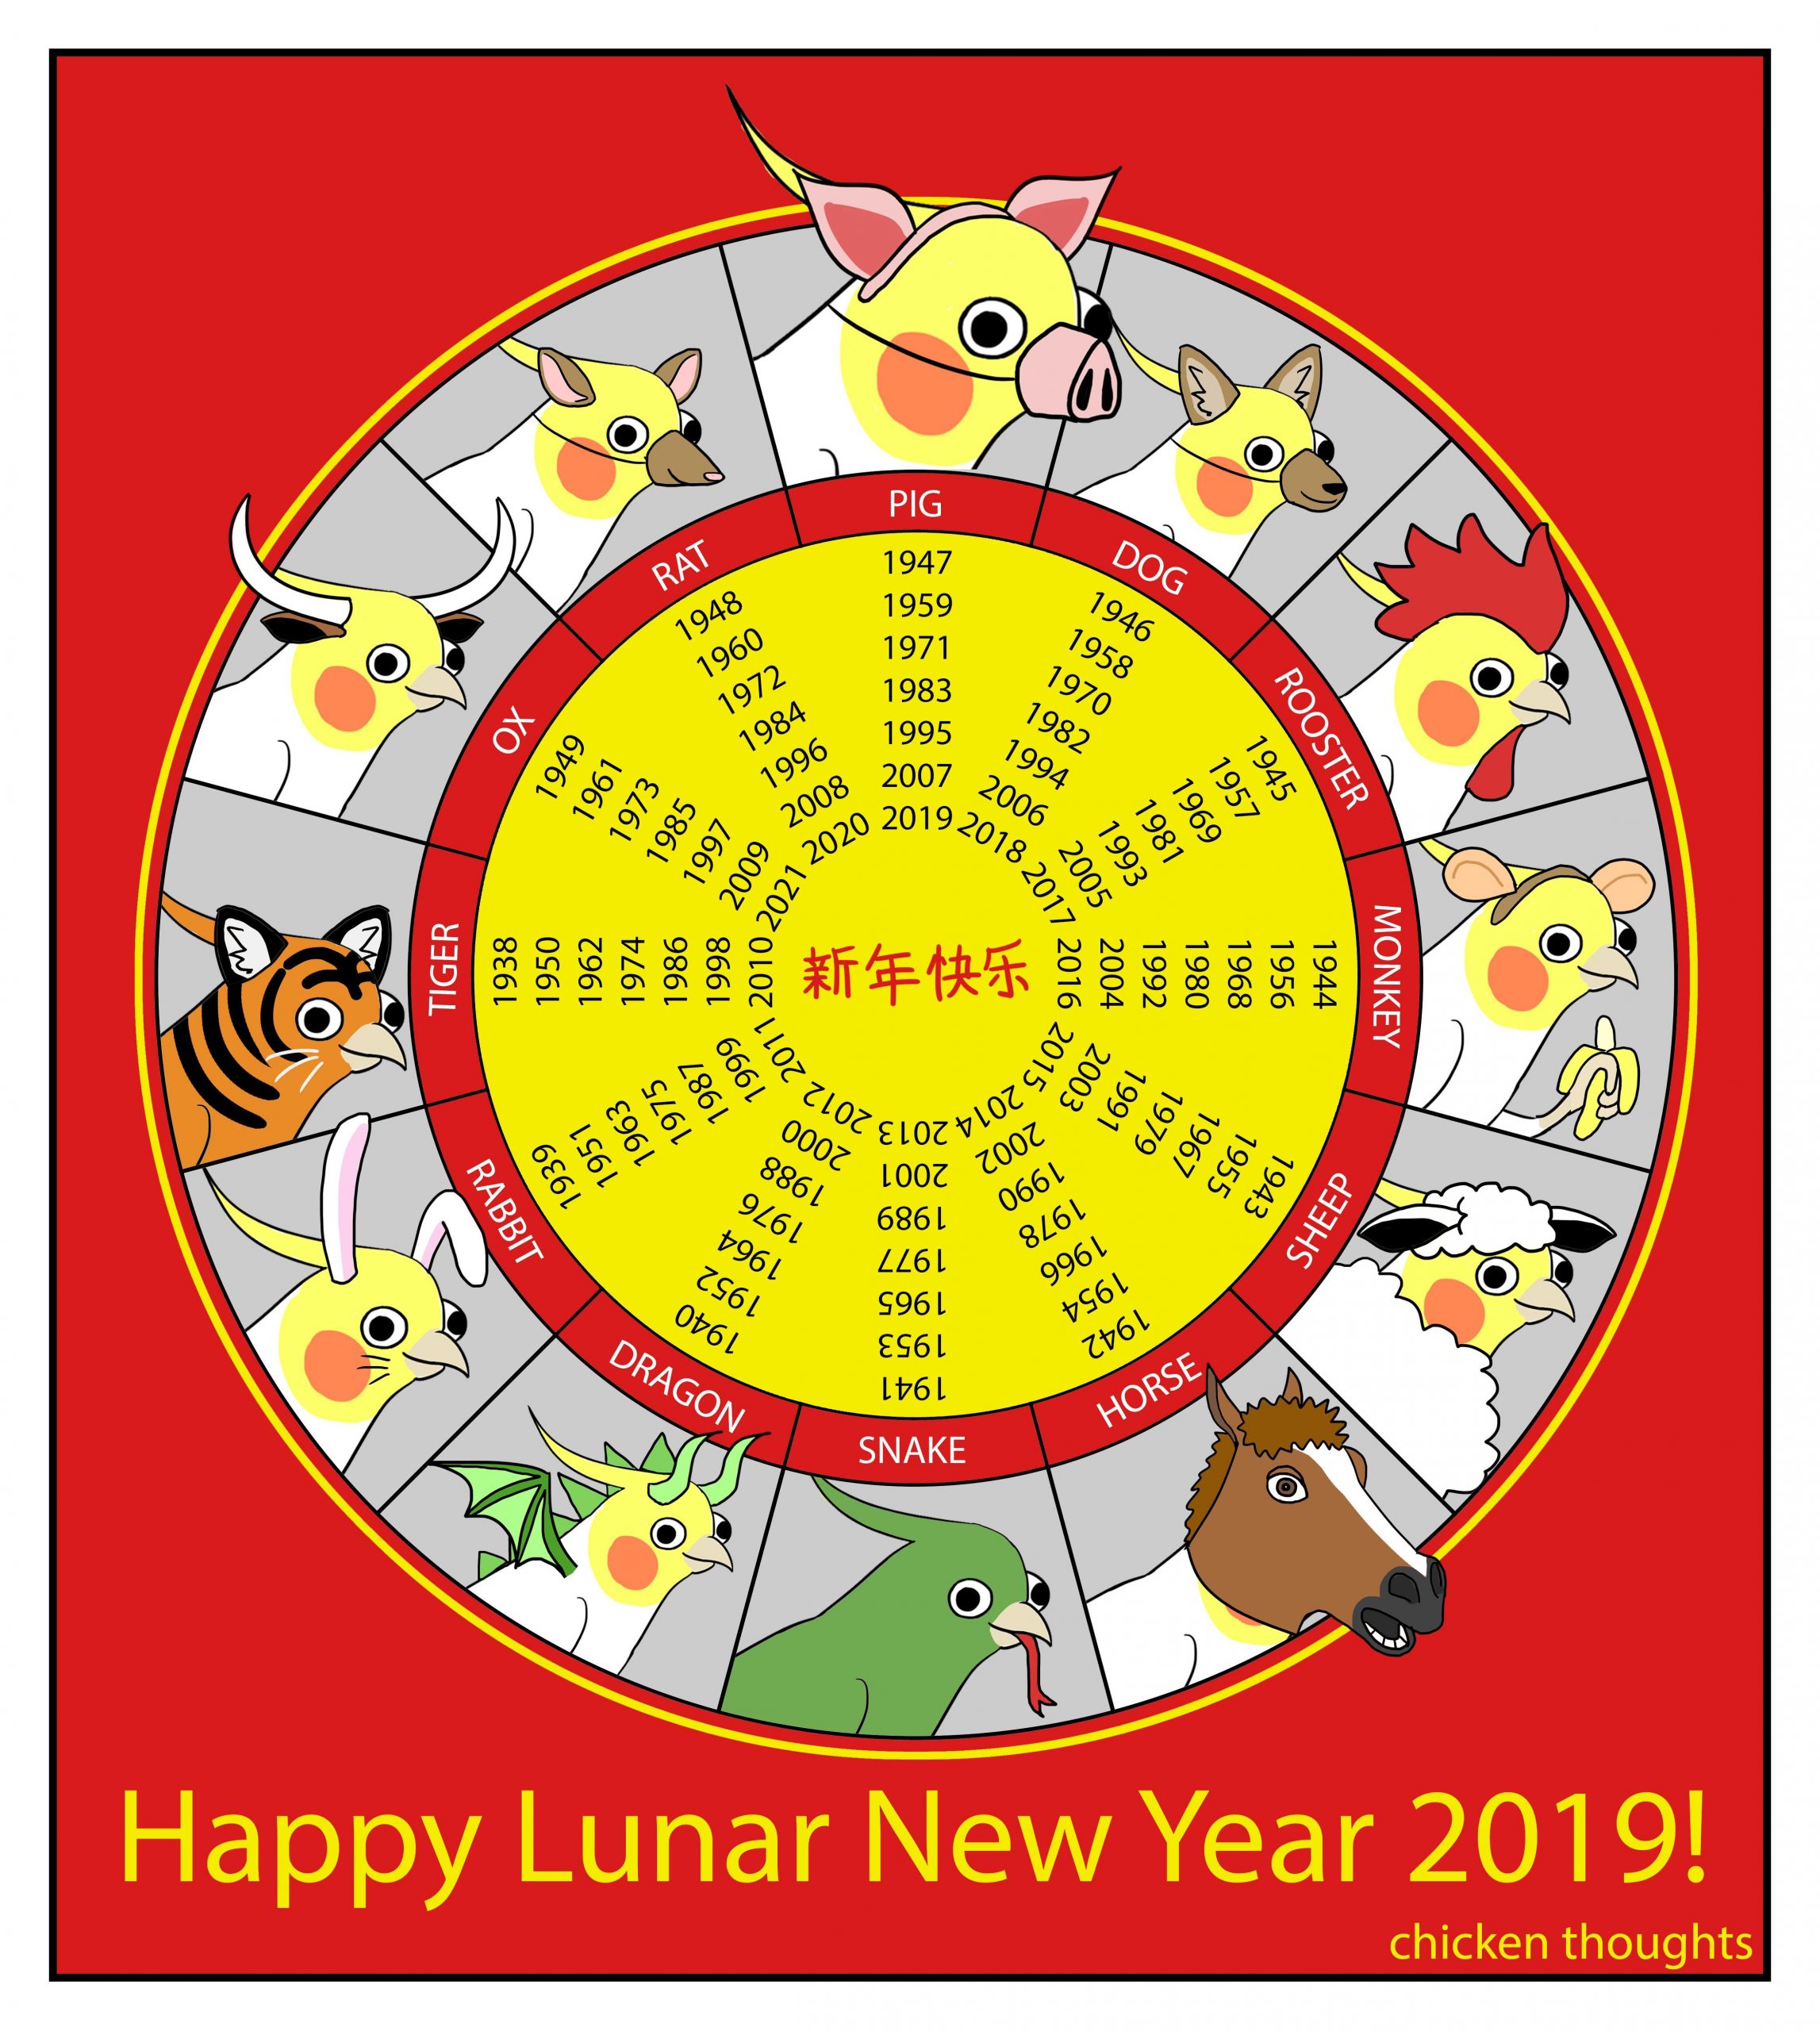 Chicken Is Excited For Lunar New Year Tomorrow! Which